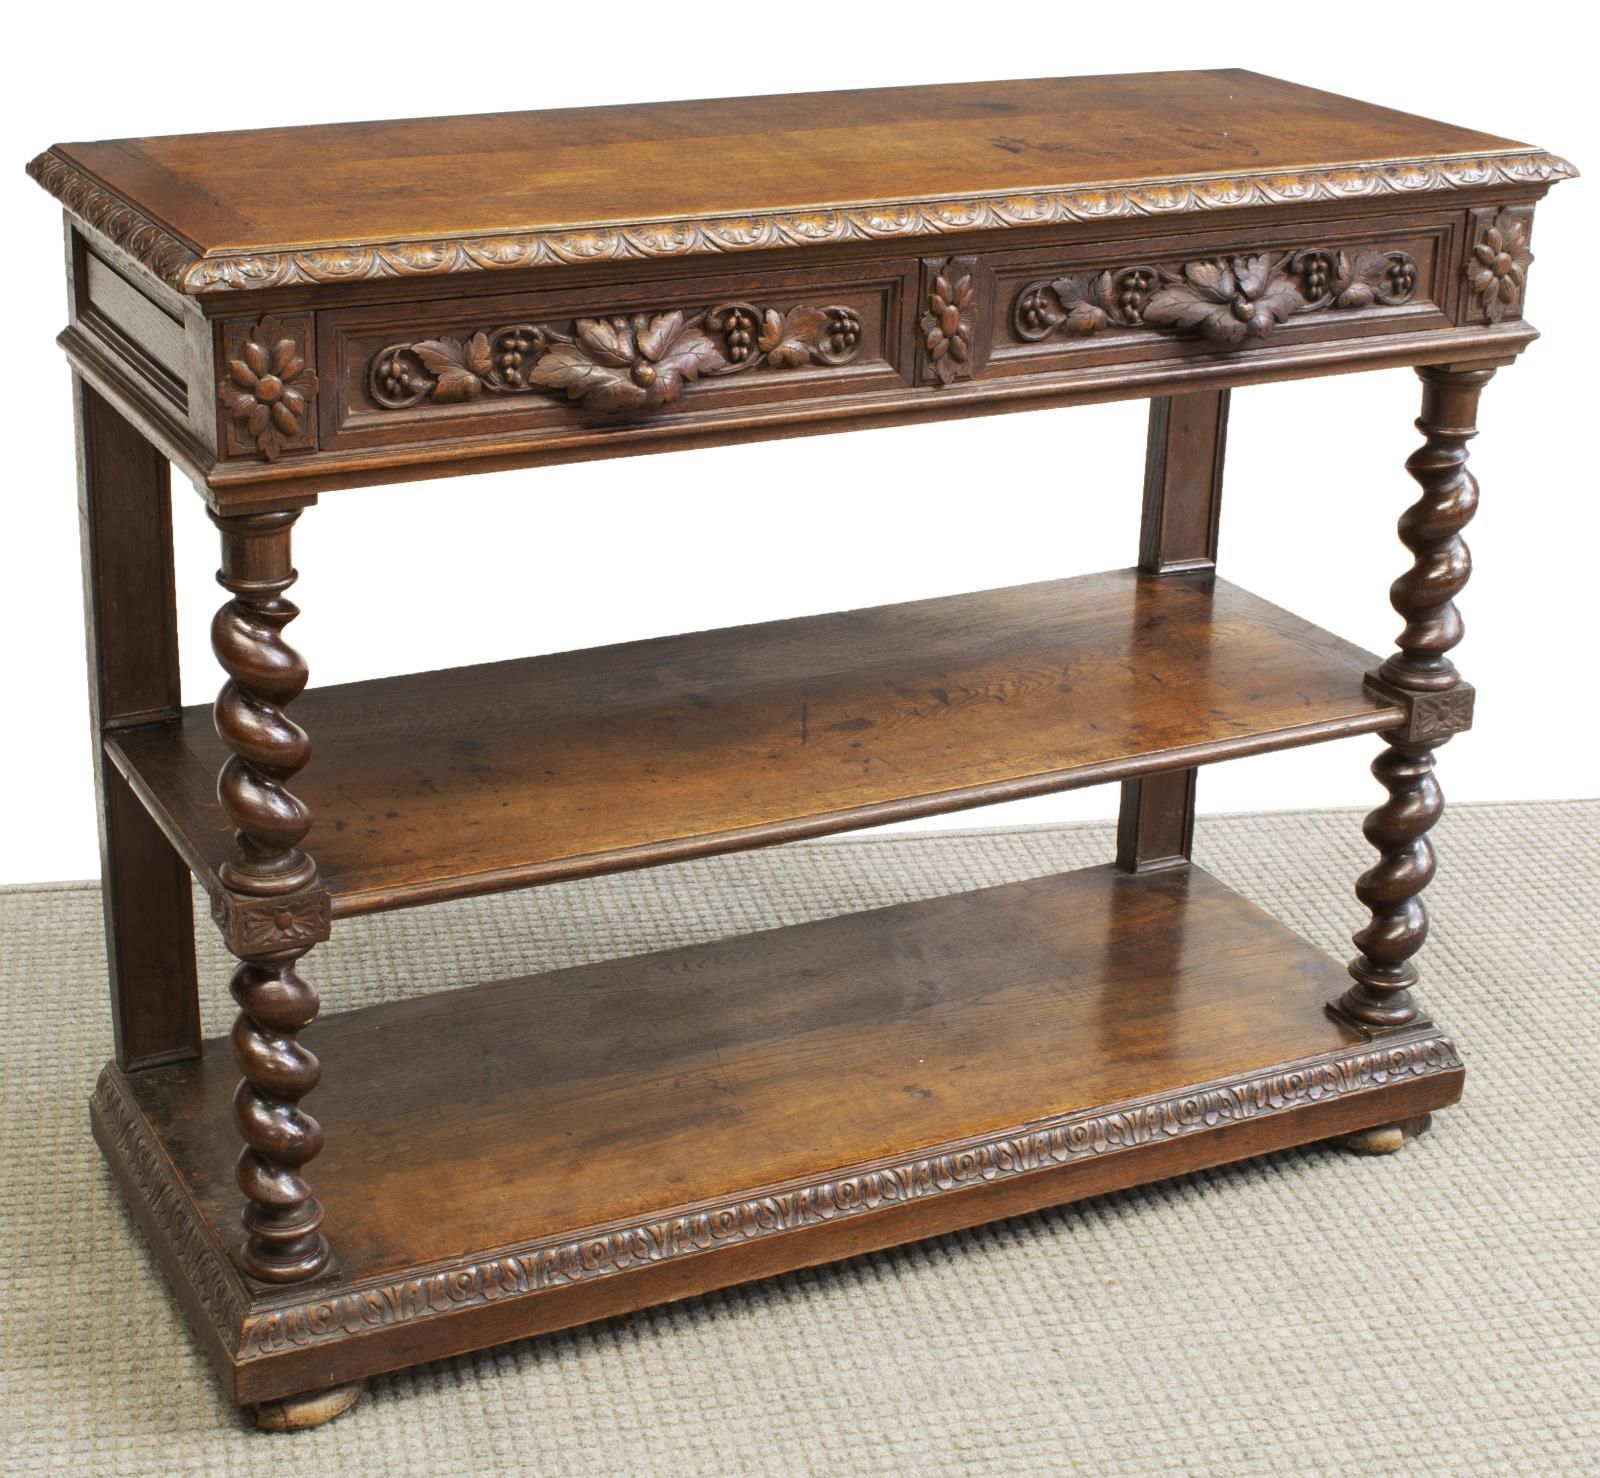 Widely Used French Henri Ii Style Carved Oak Sideboard Server – April Inside Pixley  (View 8 of 20)